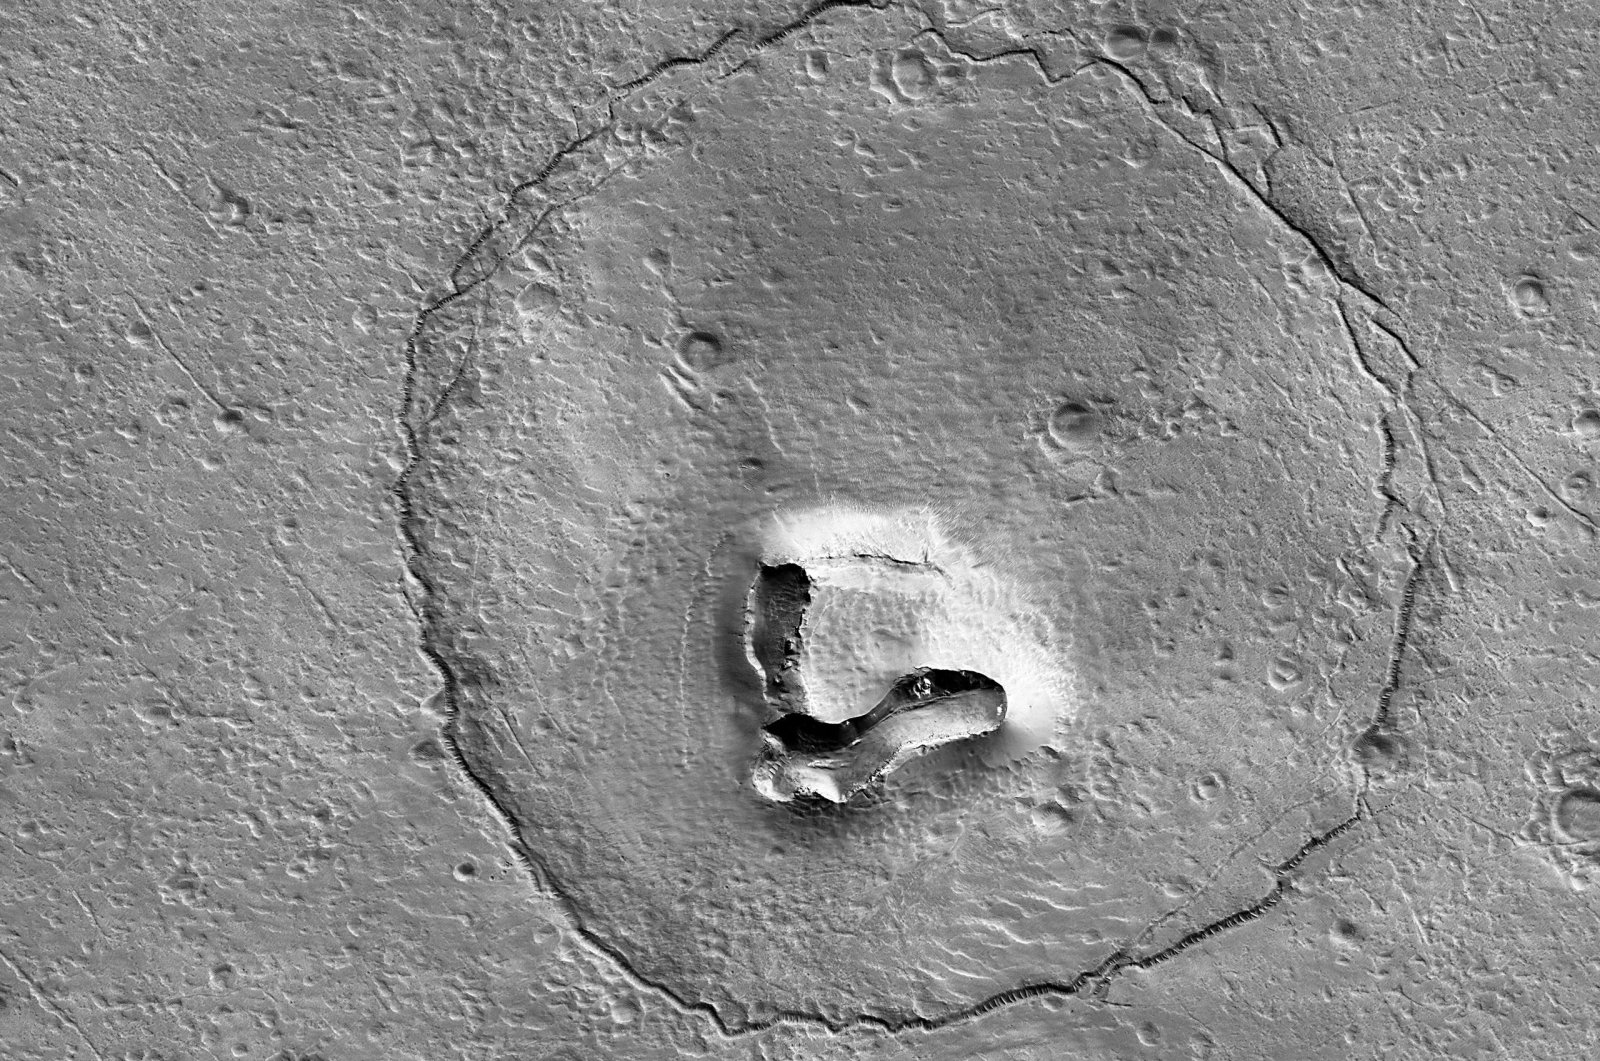 A formation on Mars that resembles a bear, Jan. 25, 2023. (Reuters Photo)